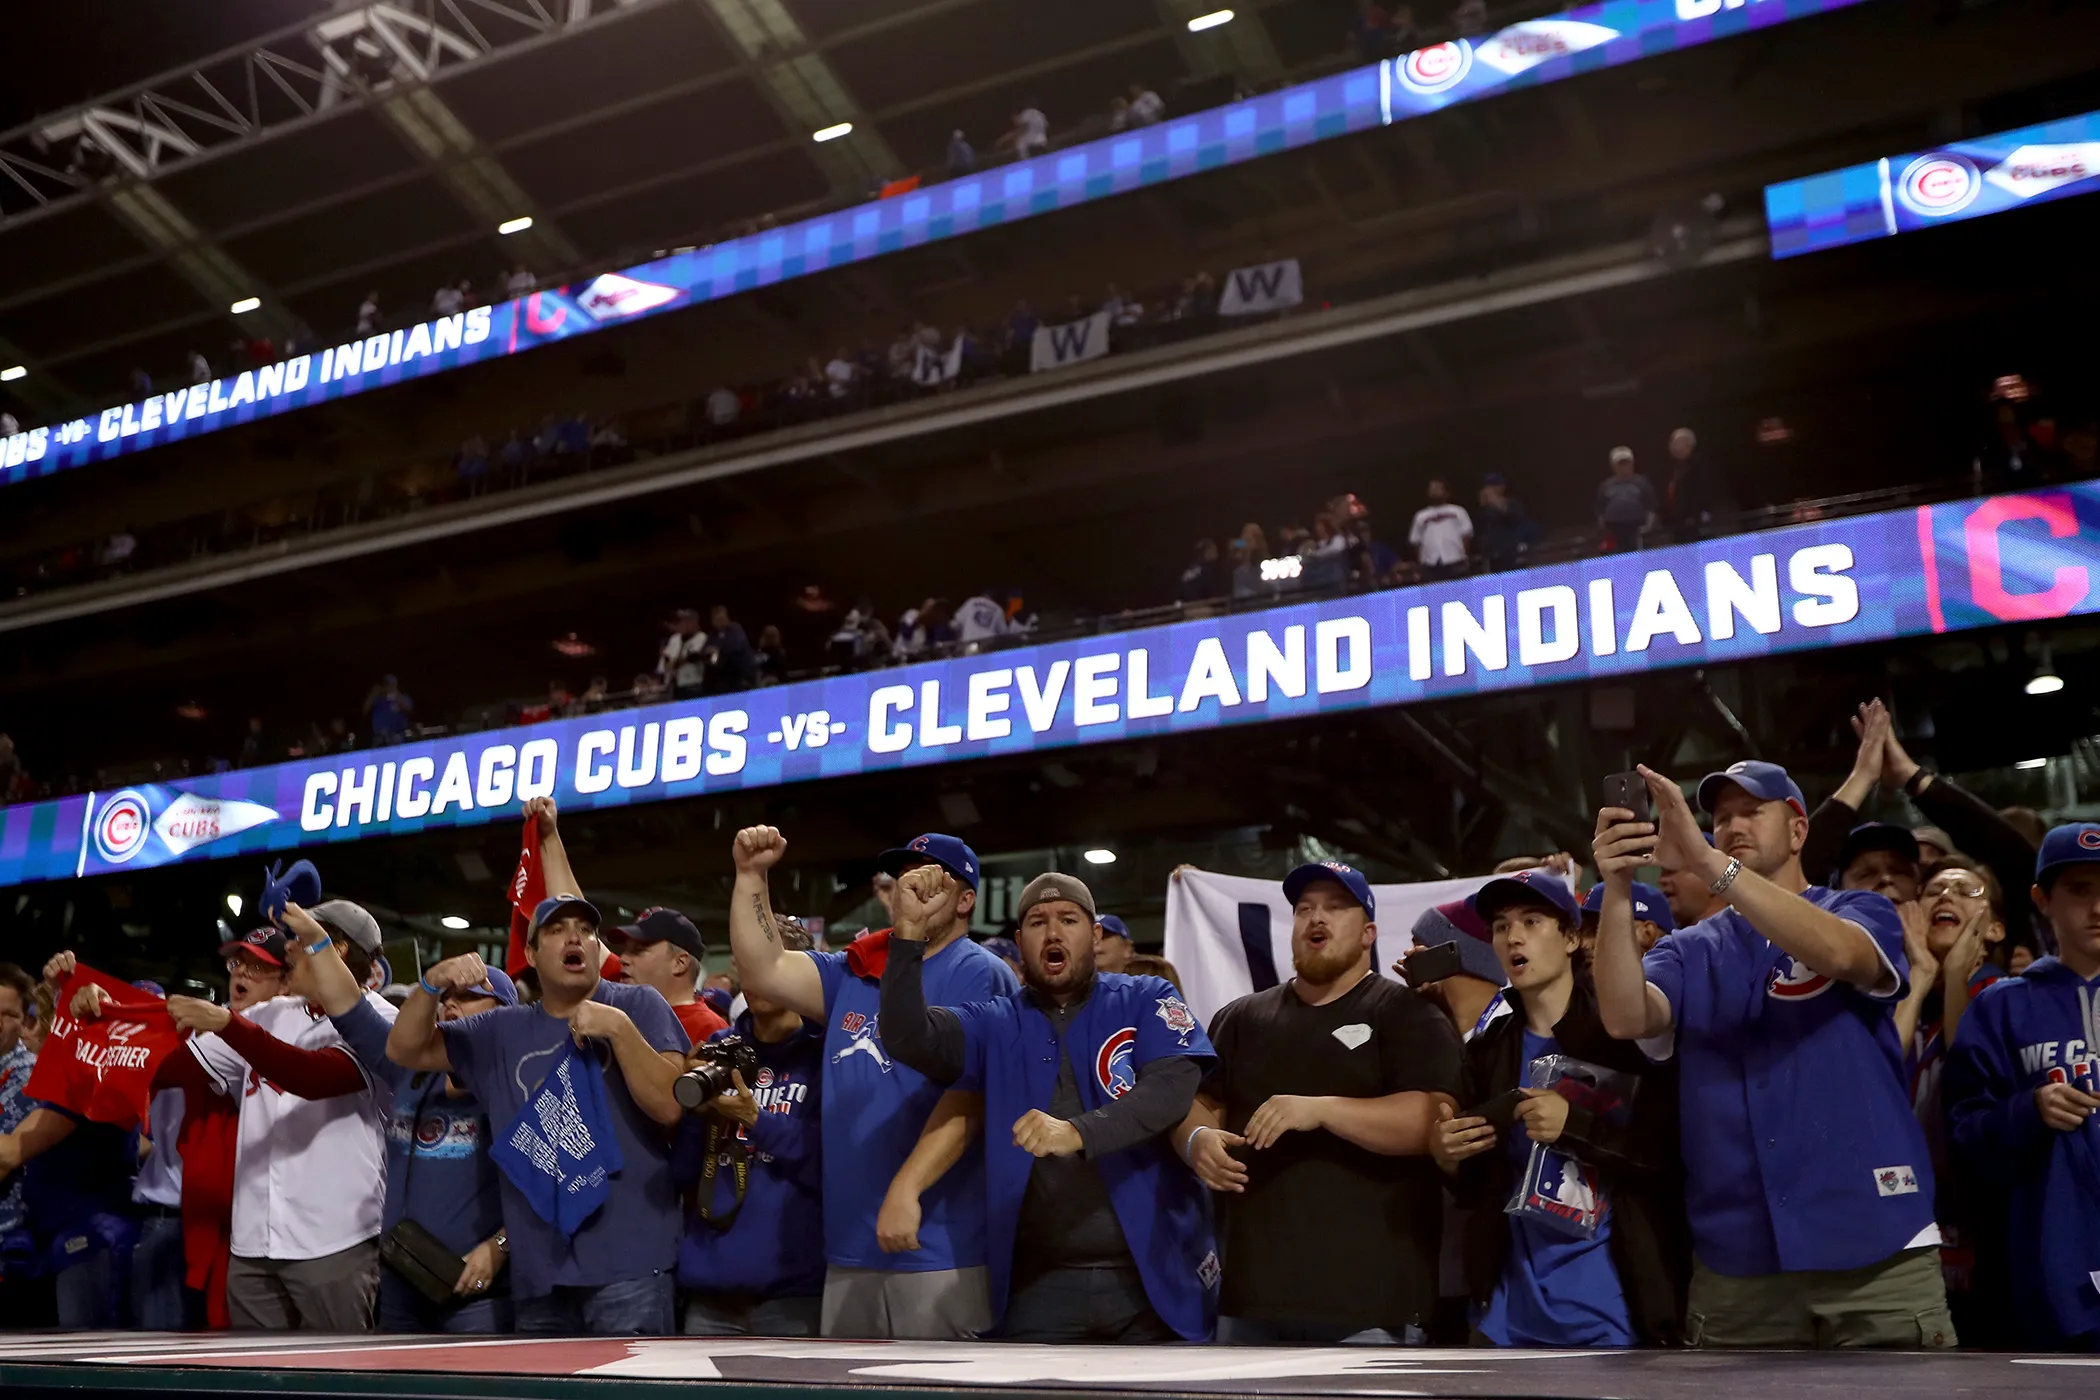 Cubs win to force Game 7 in World Series